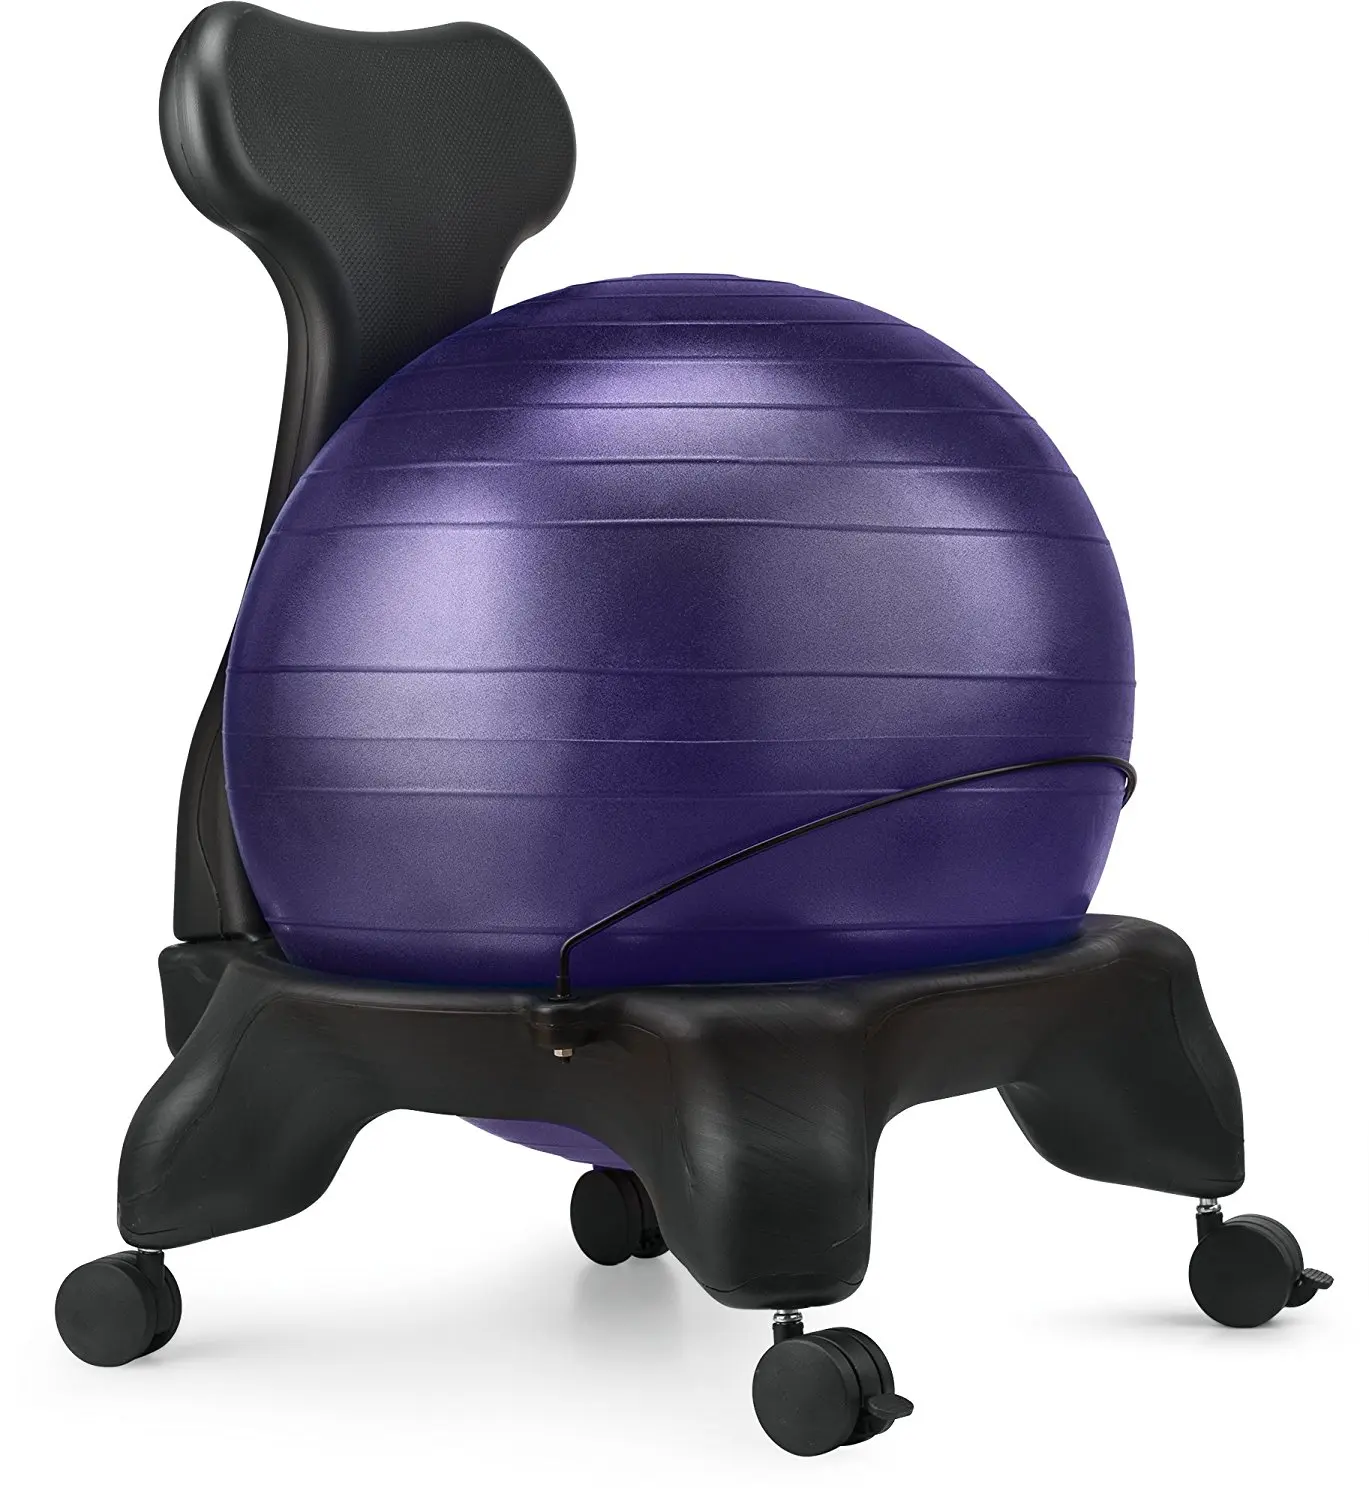 Buy LuxFit Ball Chair, Premium Fitness Exercise Ball Chairs For Home